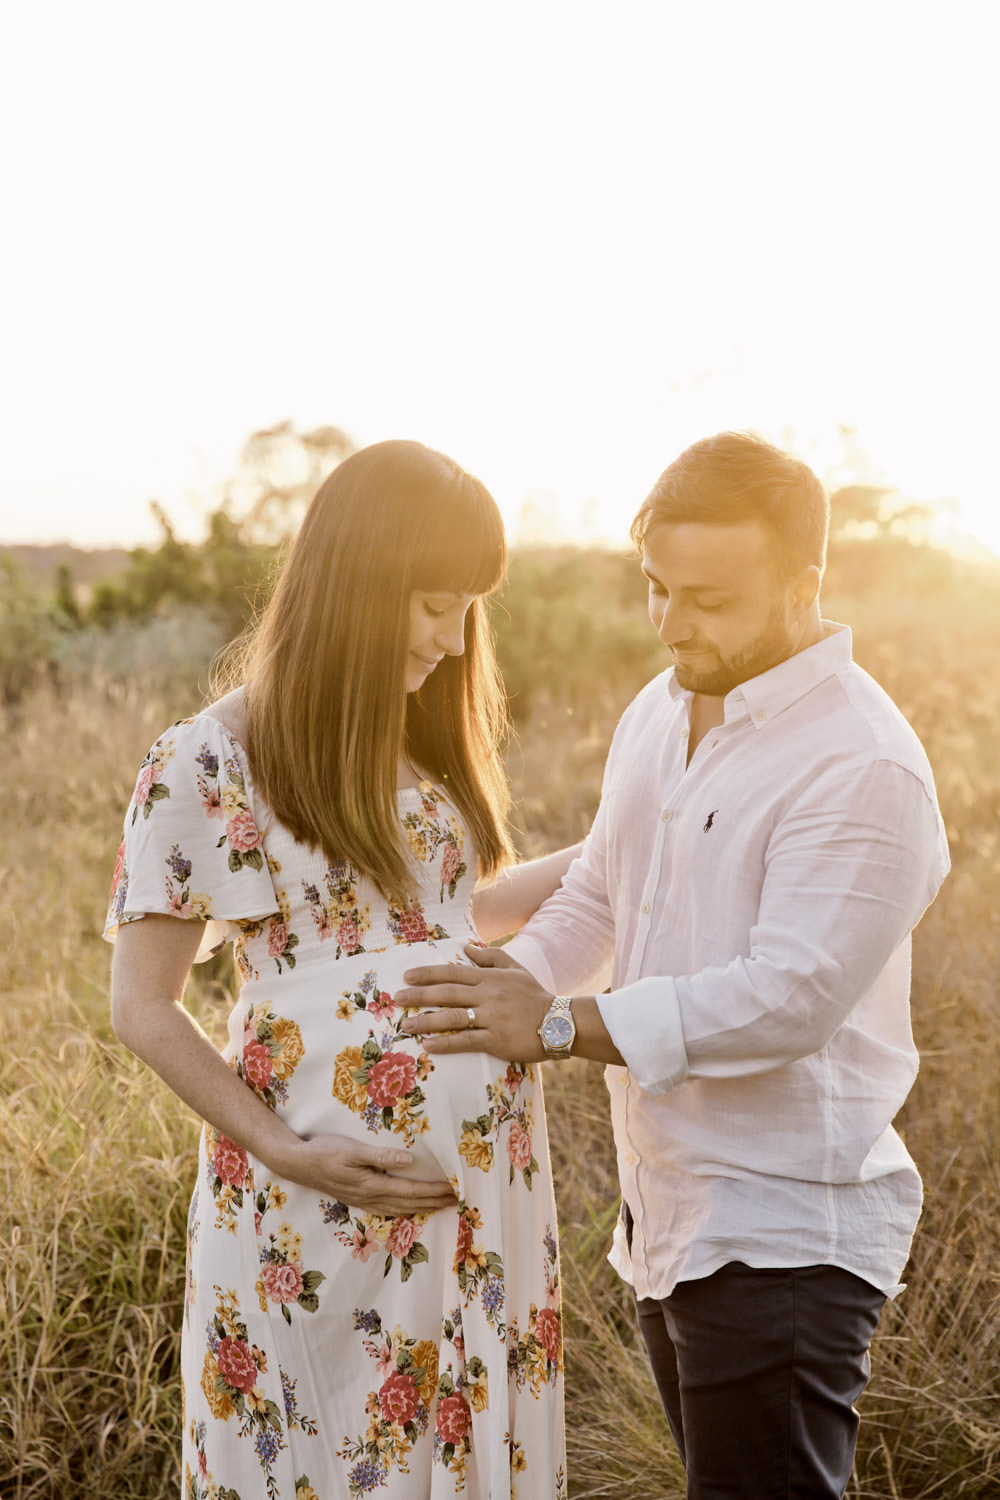 sunrise-field-Natural-family with maternity-newborn-lifestyle-imagery- photography in Brisbane- QuinceandMulberry